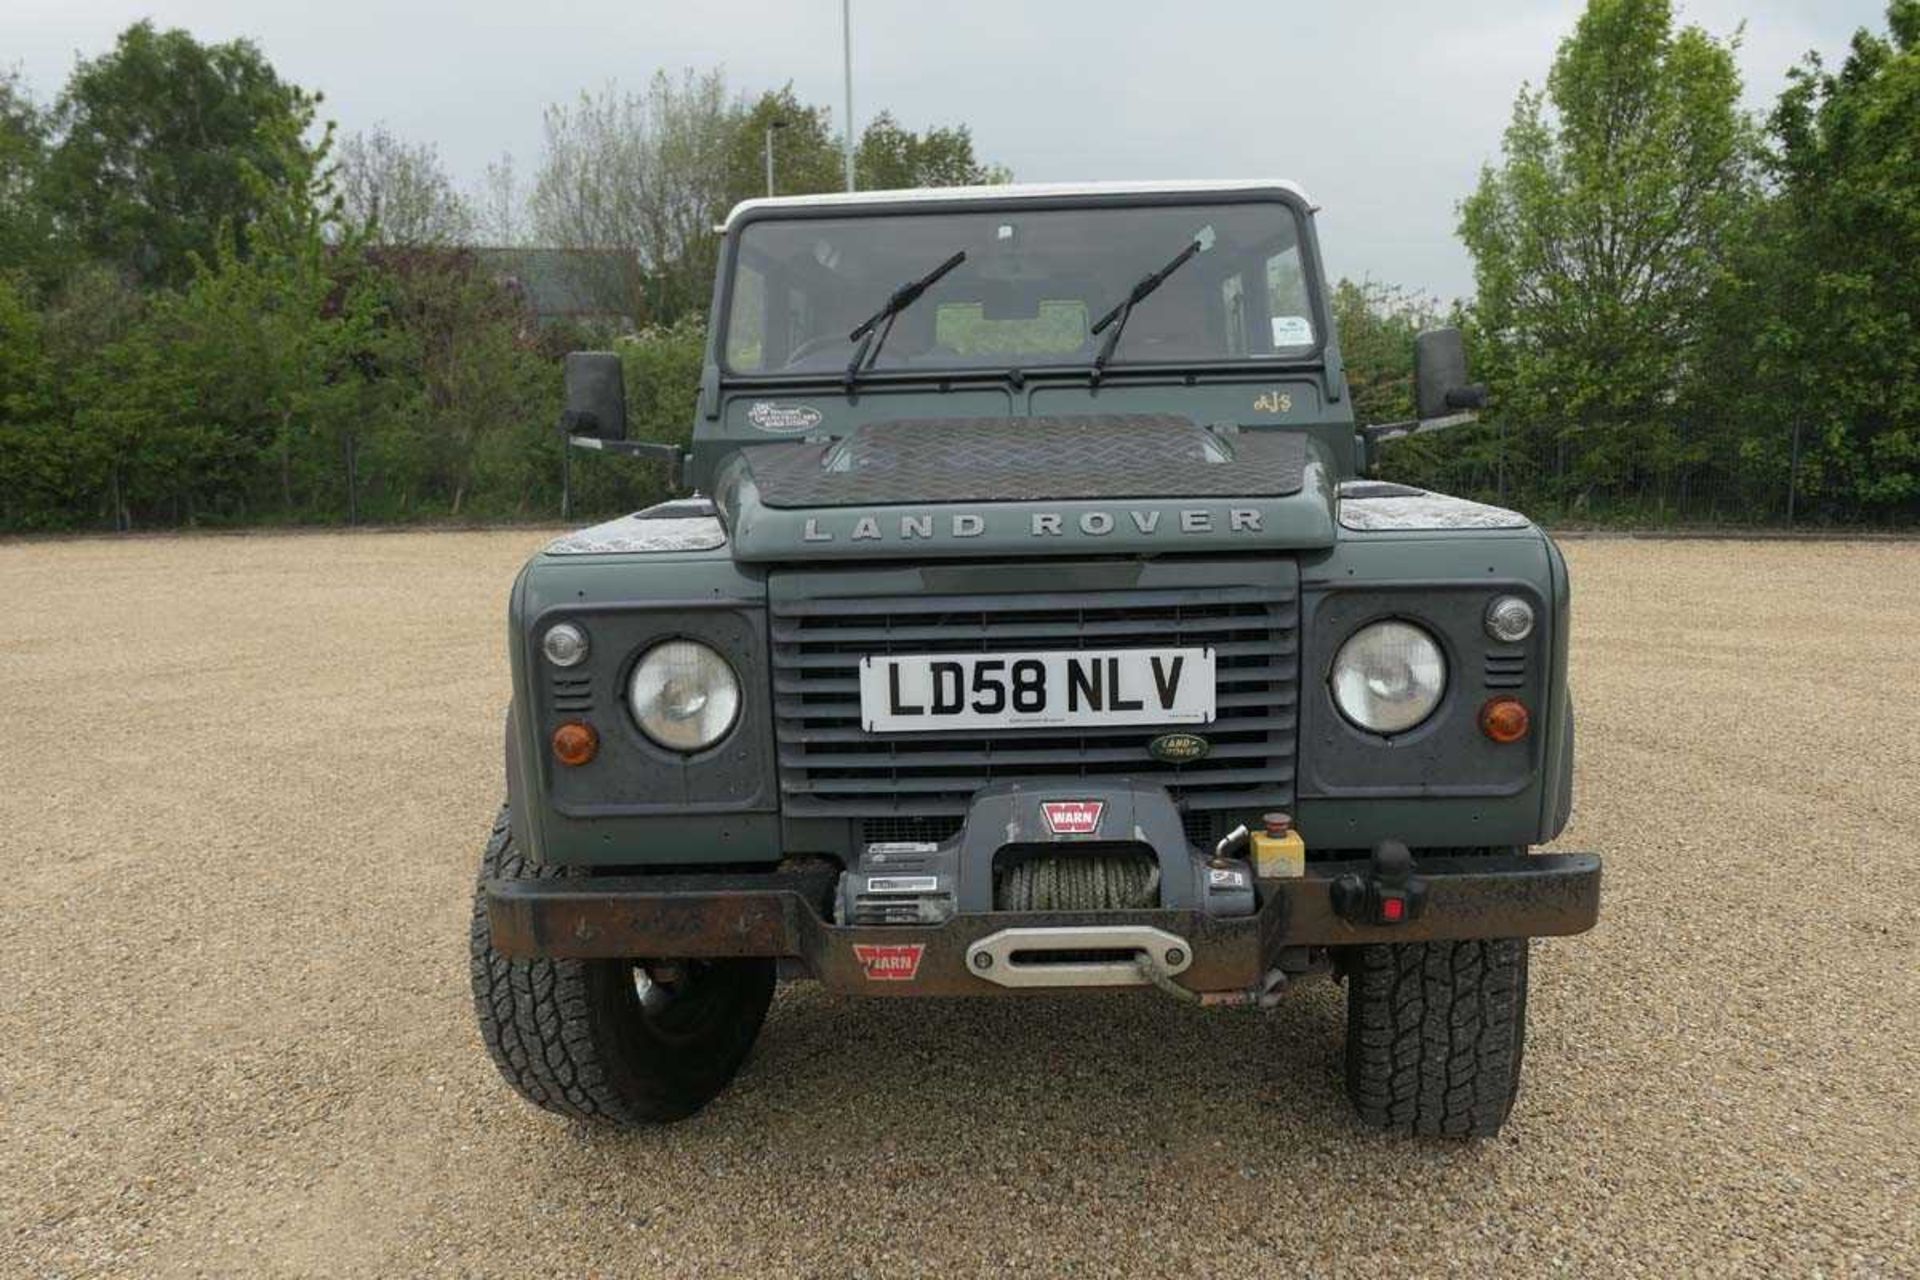 (LD58 NLV) 2008 Land Rover Defender 110 LWB station wagon estate in green, 2402cc diesel, 6-speed - Image 2 of 20